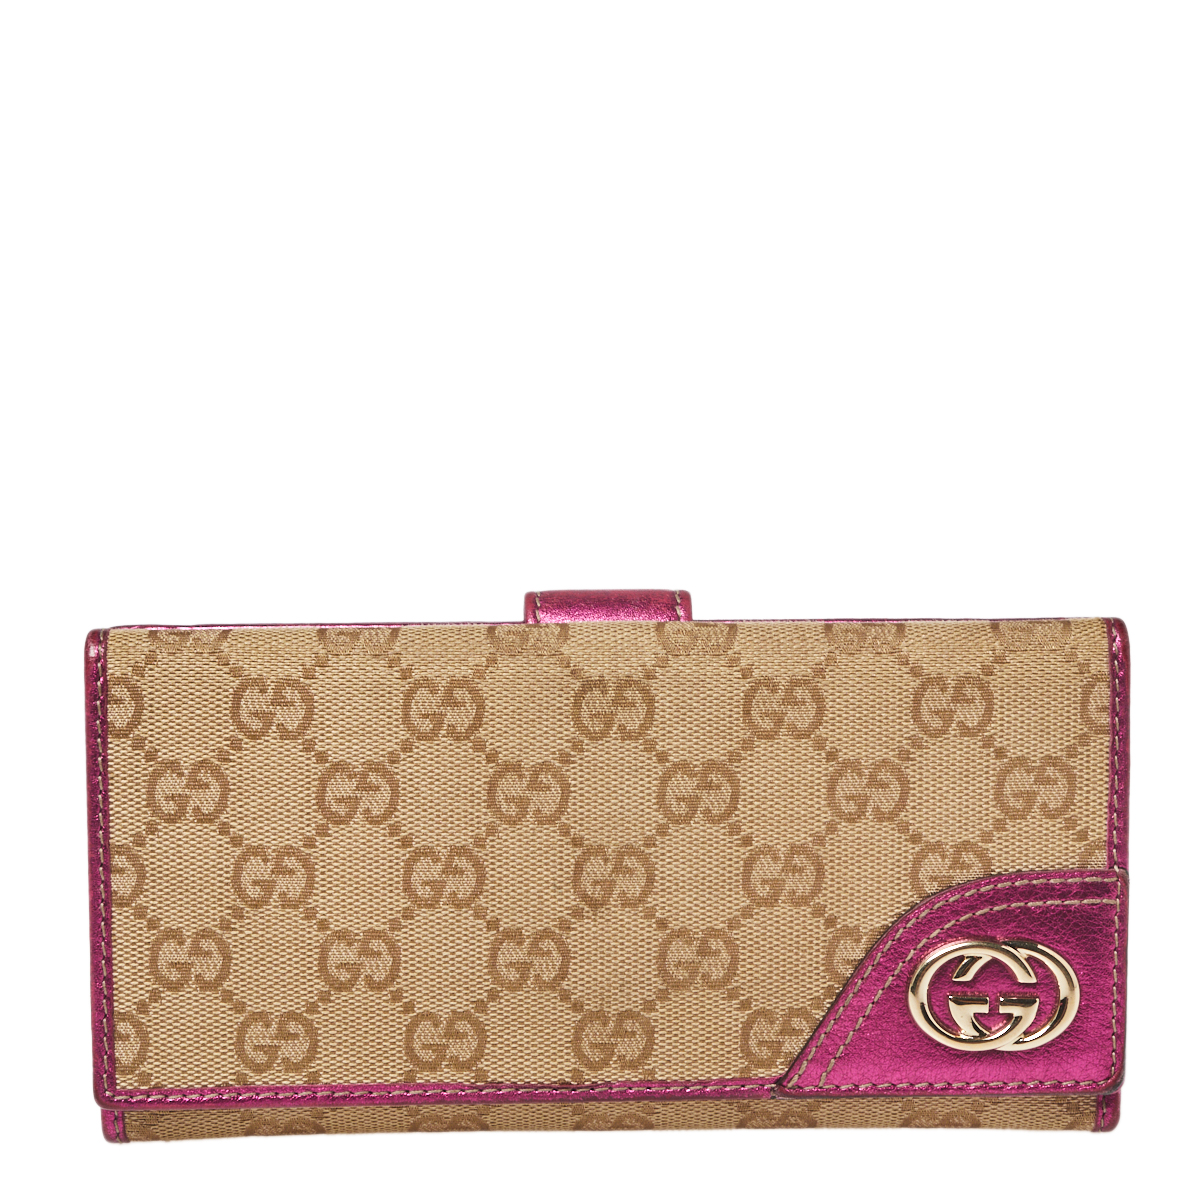 Gucci Beige/Metallic Pink GG Canvas and Leather Britt Continental Wallet